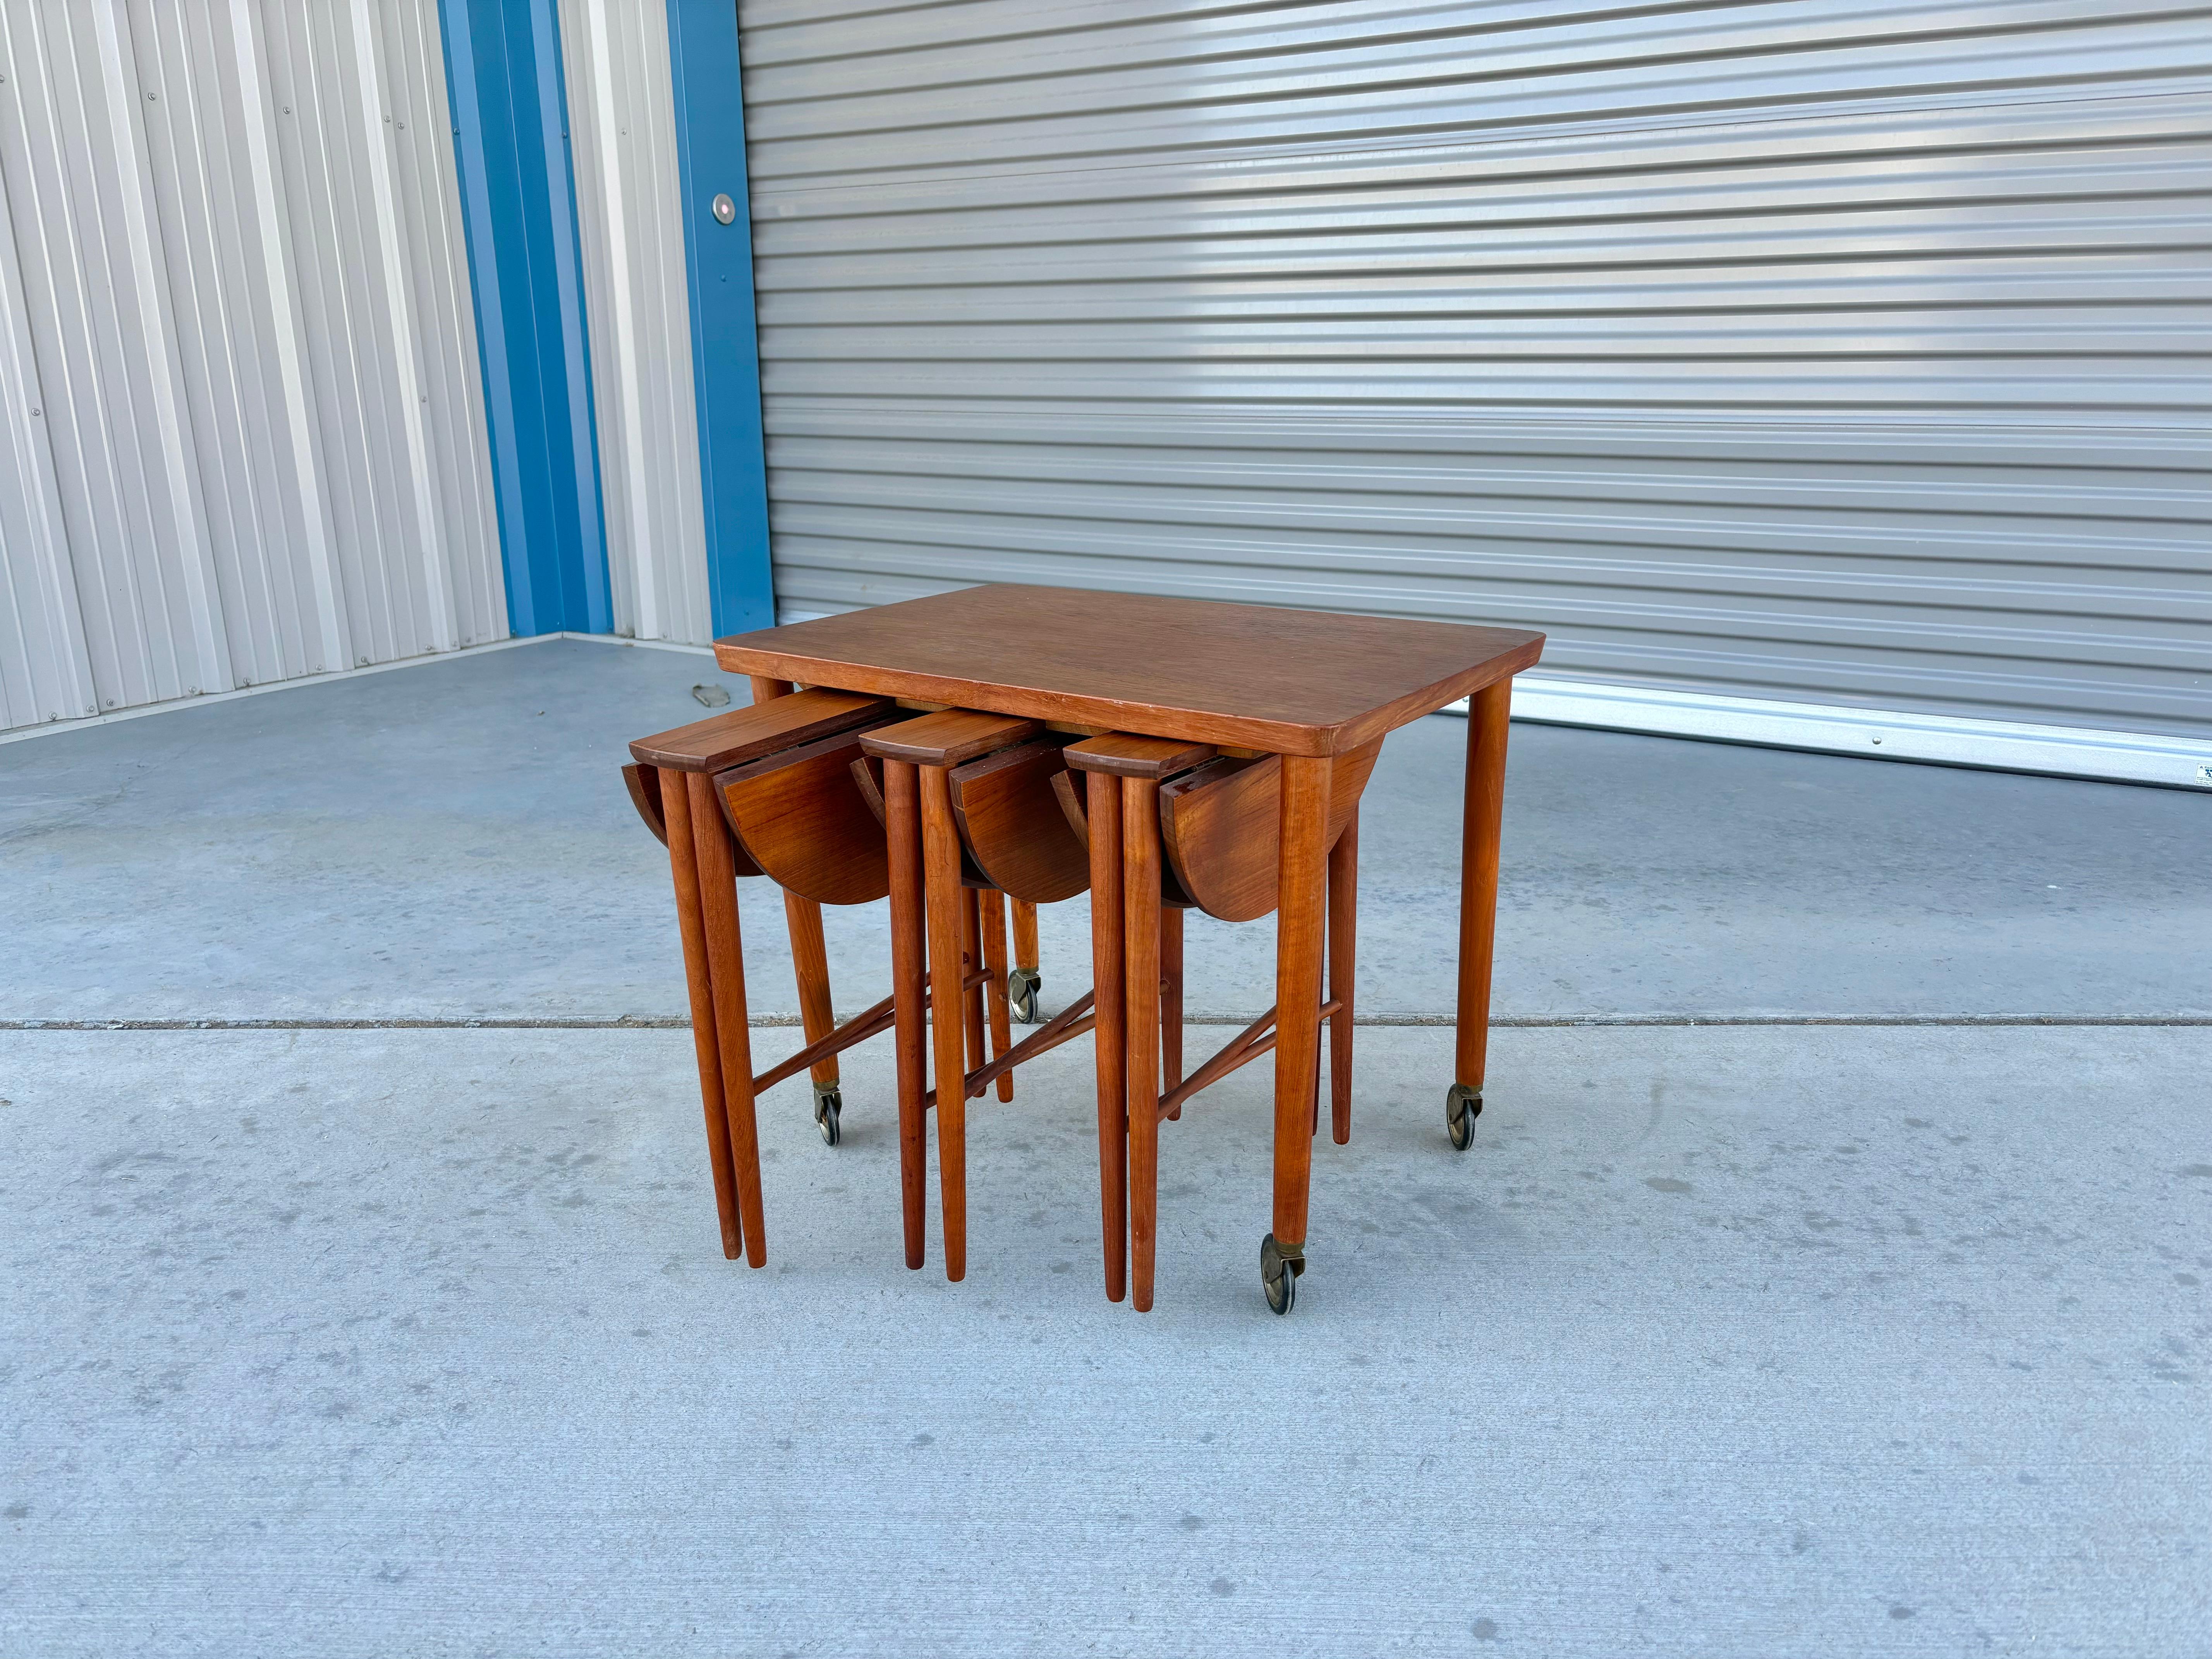 Danish modern teak nesting tables designed by Paul Hundevad in Denmark circa 1960s. The sleek teak frame and unique design make this set a must-have for any mid-century modern enthusiast. What's impressive is that the main table has three smaller